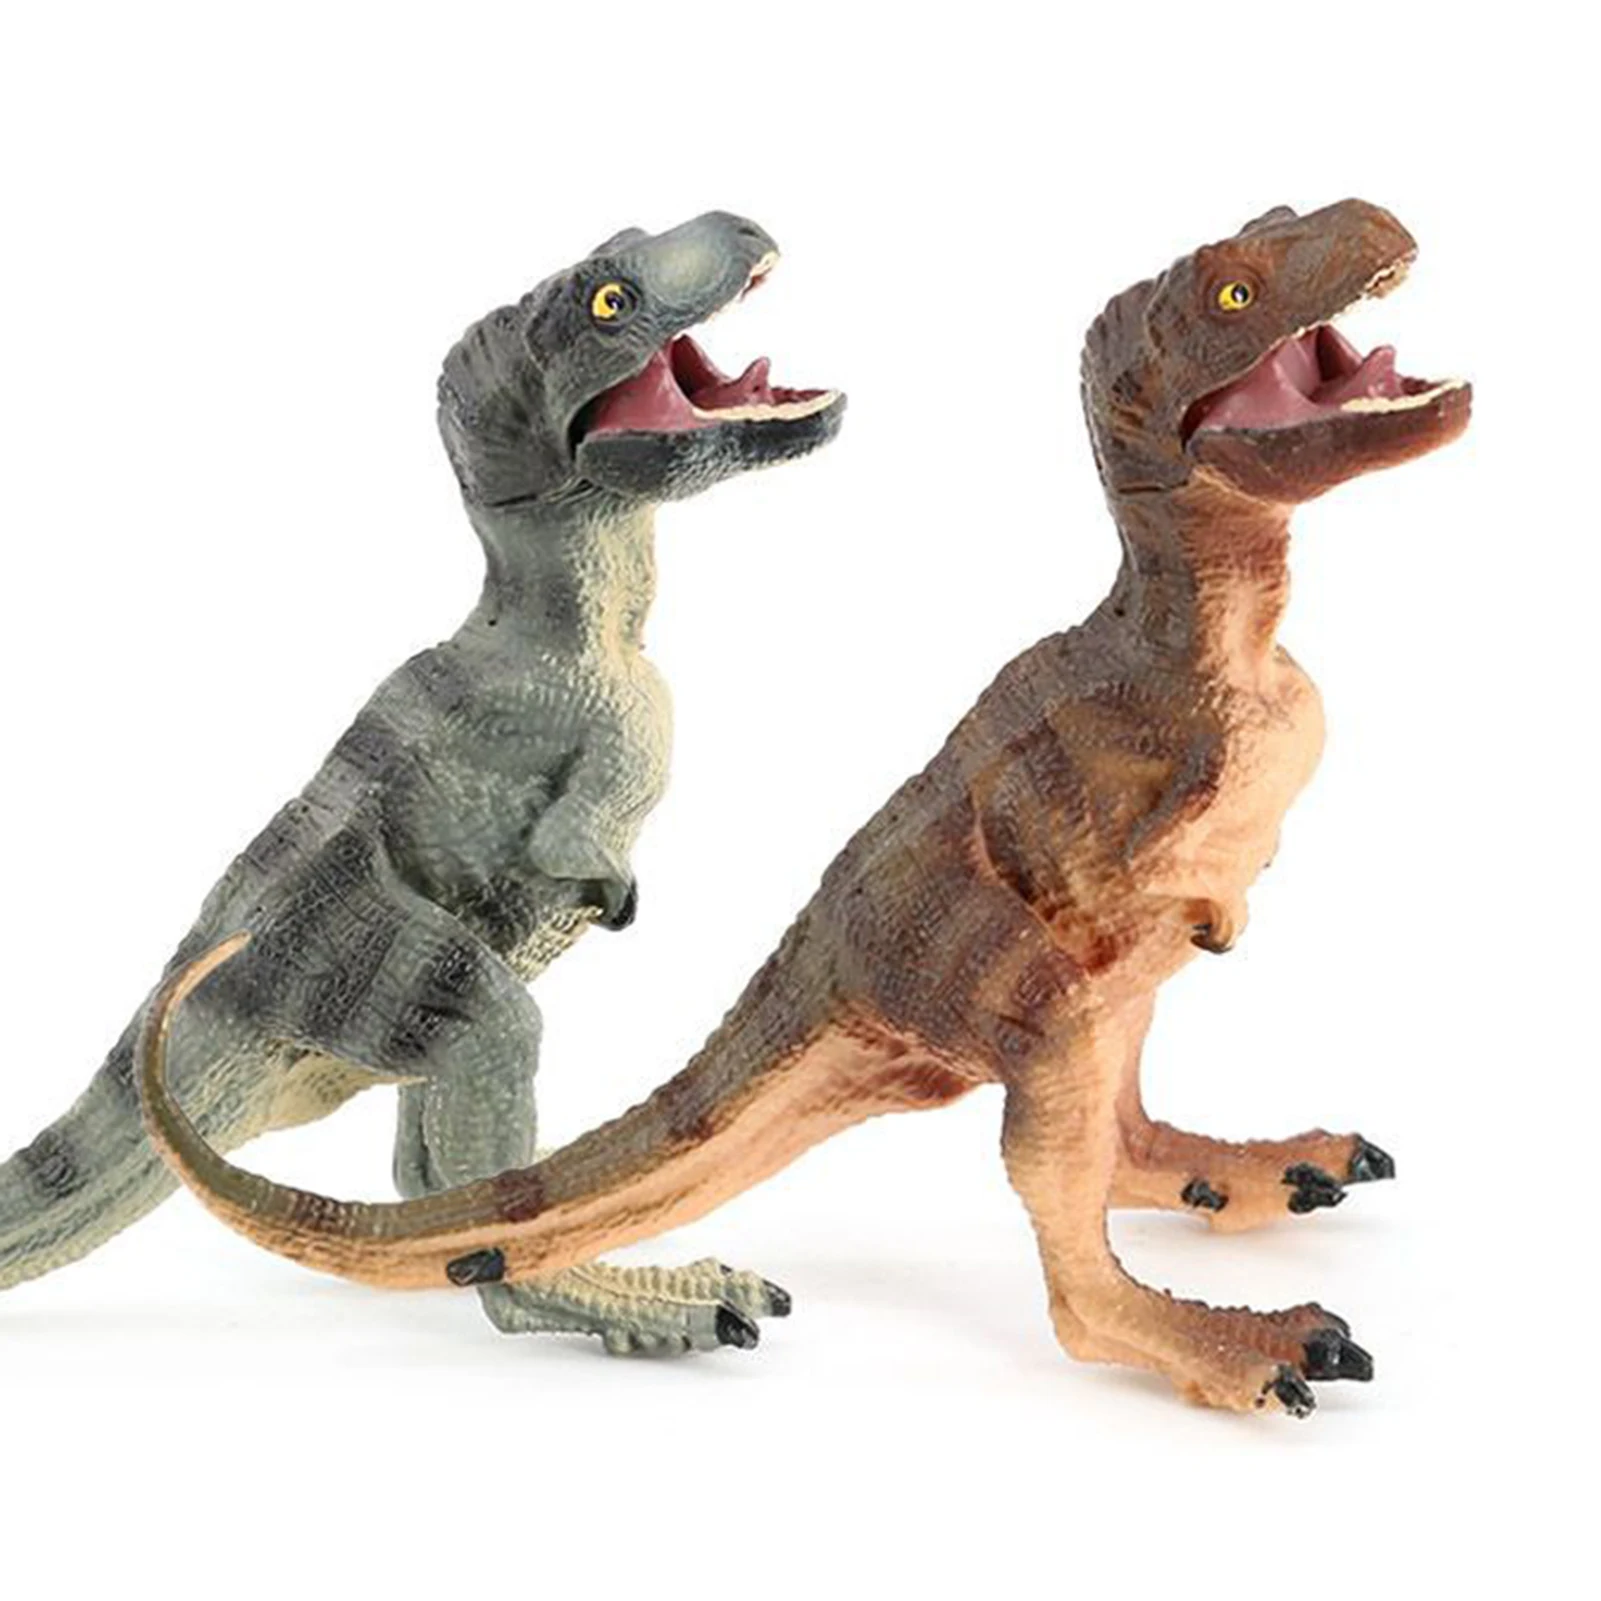 

Tyrannosaurus Rex Figure Educational Realistic Dinosaur Toys PVC Wildlife Animal Model Figurines With Open And Closed Mouth For